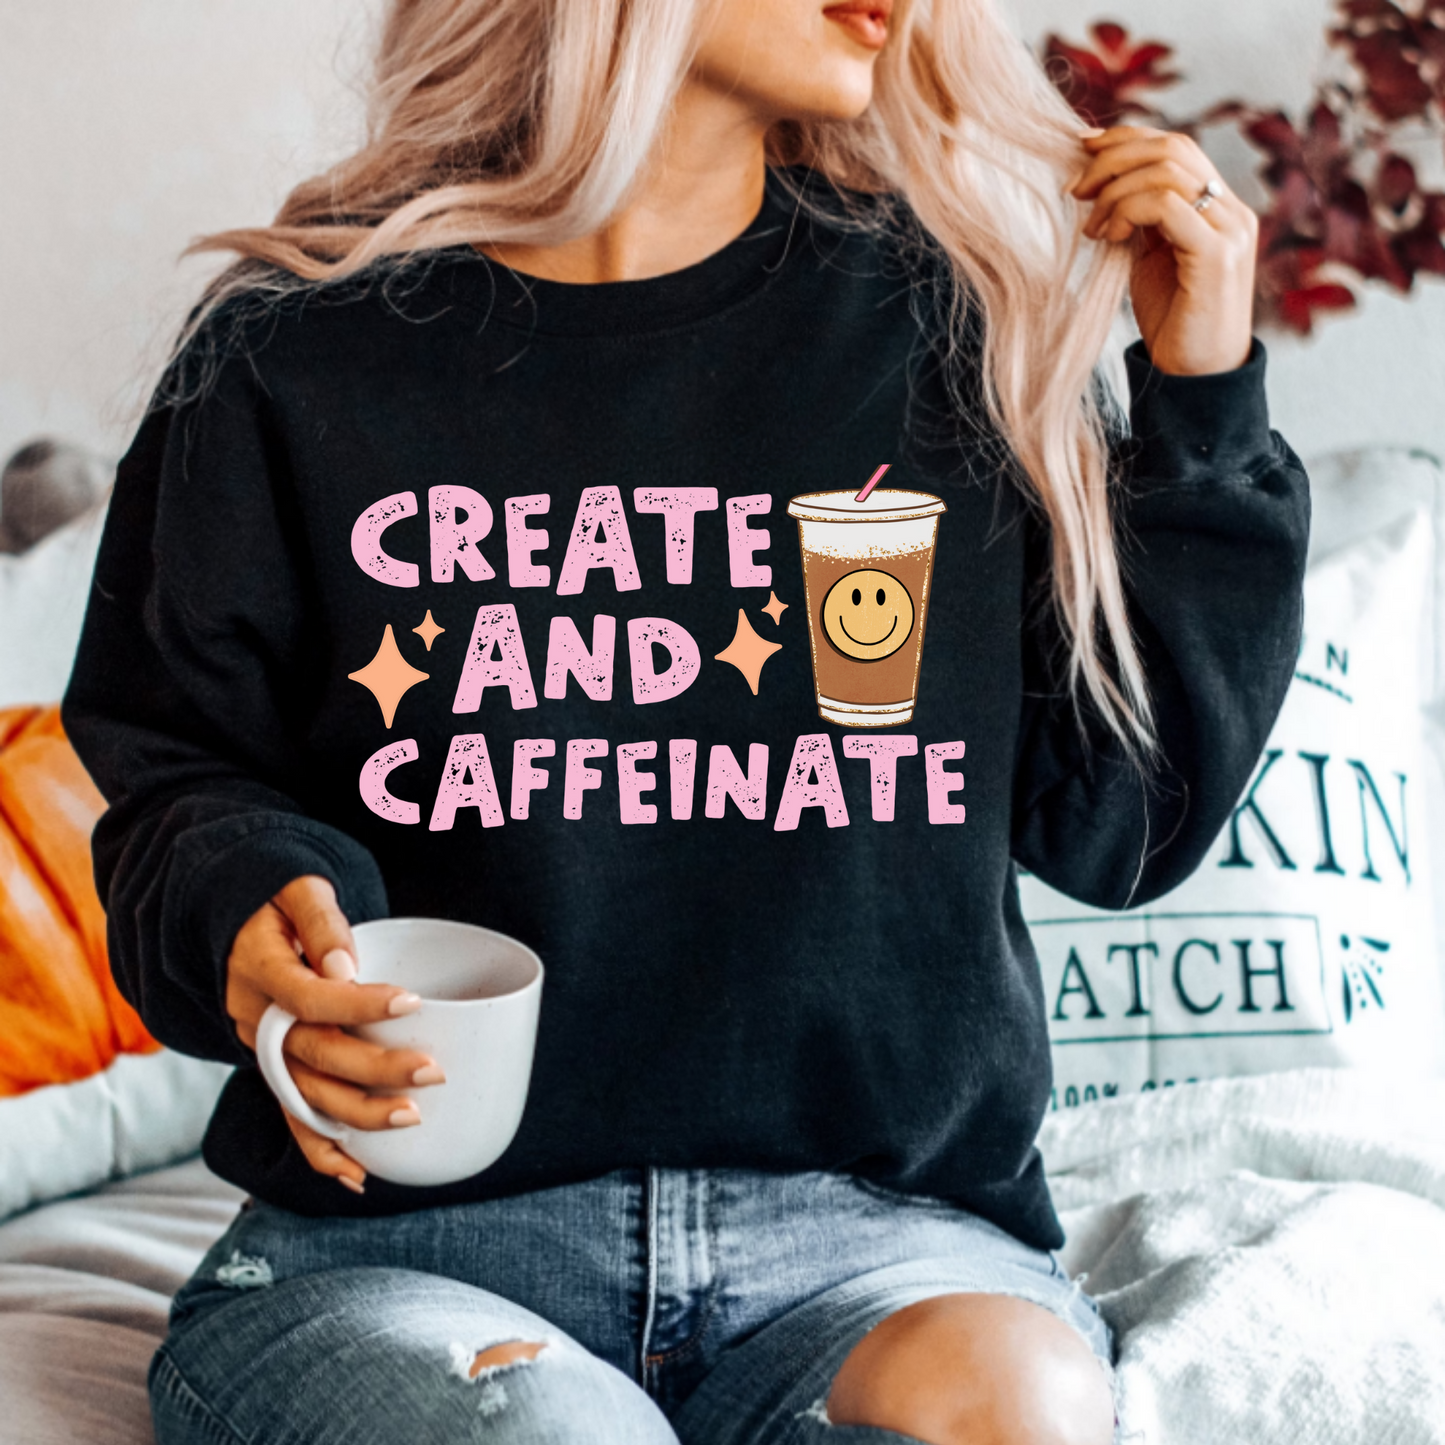 (shirt not included) Create and Caffeinate - Matte Clear Film Transfer